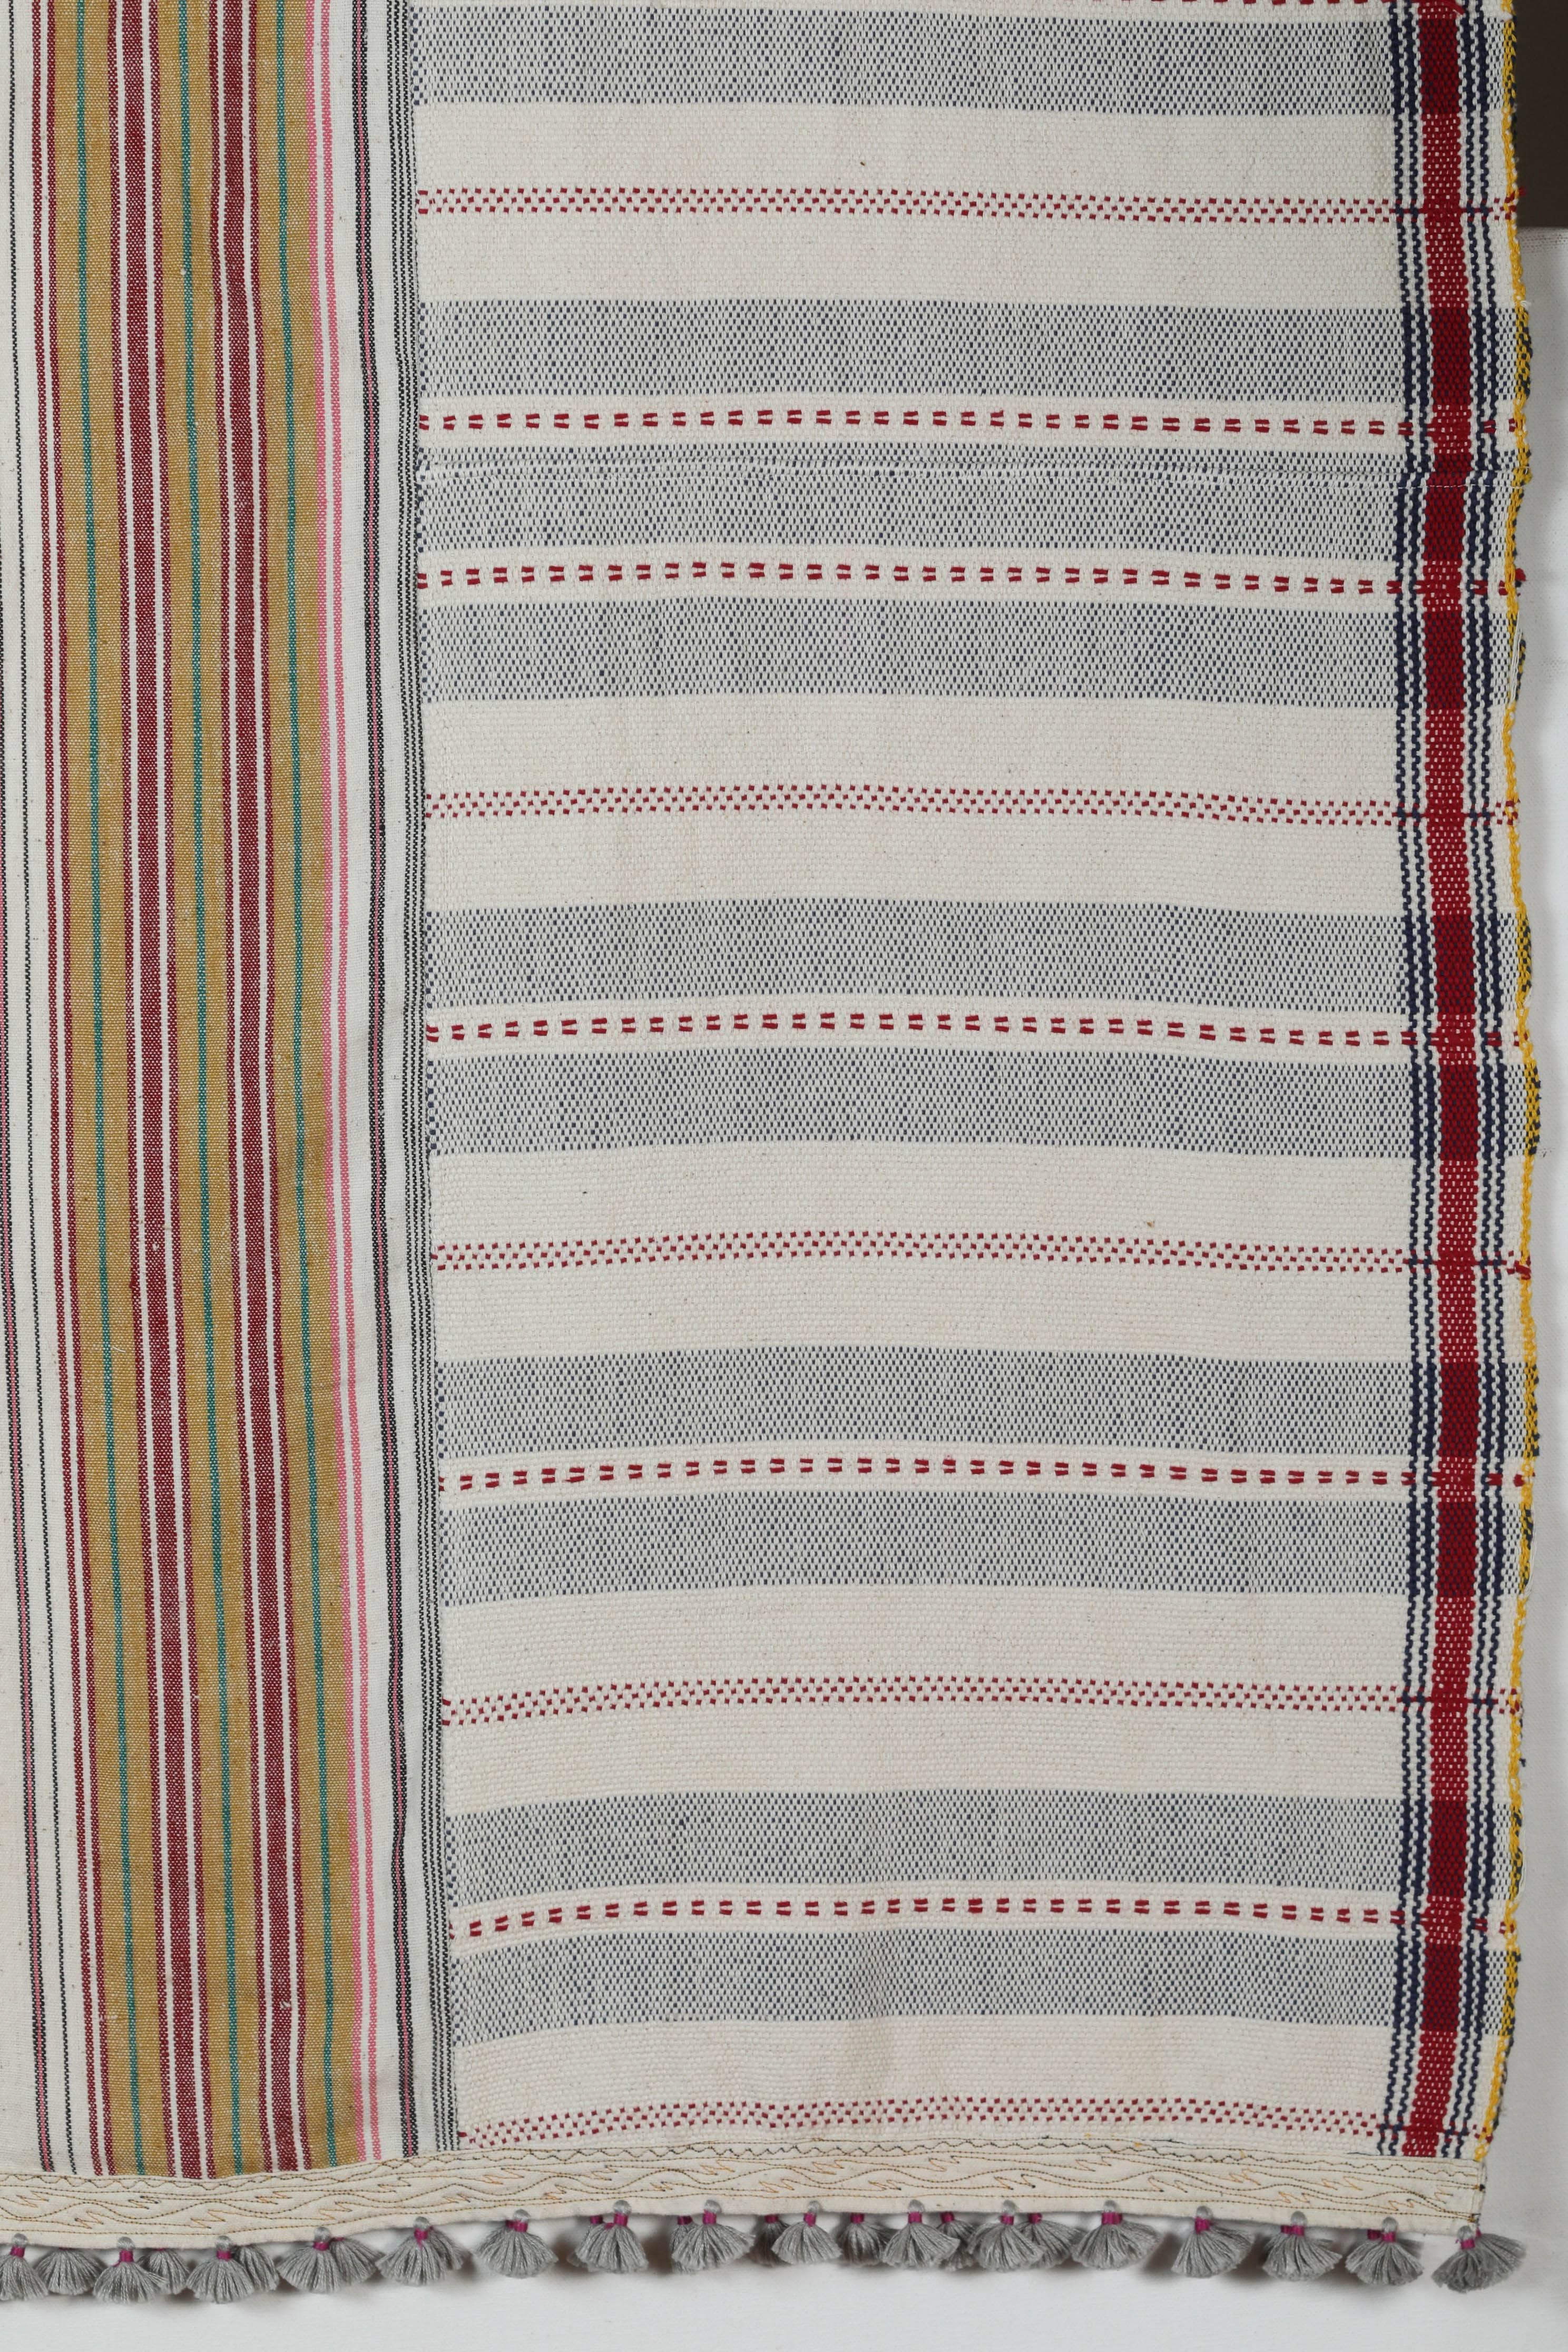 Kala naturally dyed organic cotton from Gujarat, India. Hand-loomed using traditional Indian textile techniques to produce extra weft woven stripes and plaids. This ivory, blue, red and yellow bedcover has added hand-knotted tassels and areas of